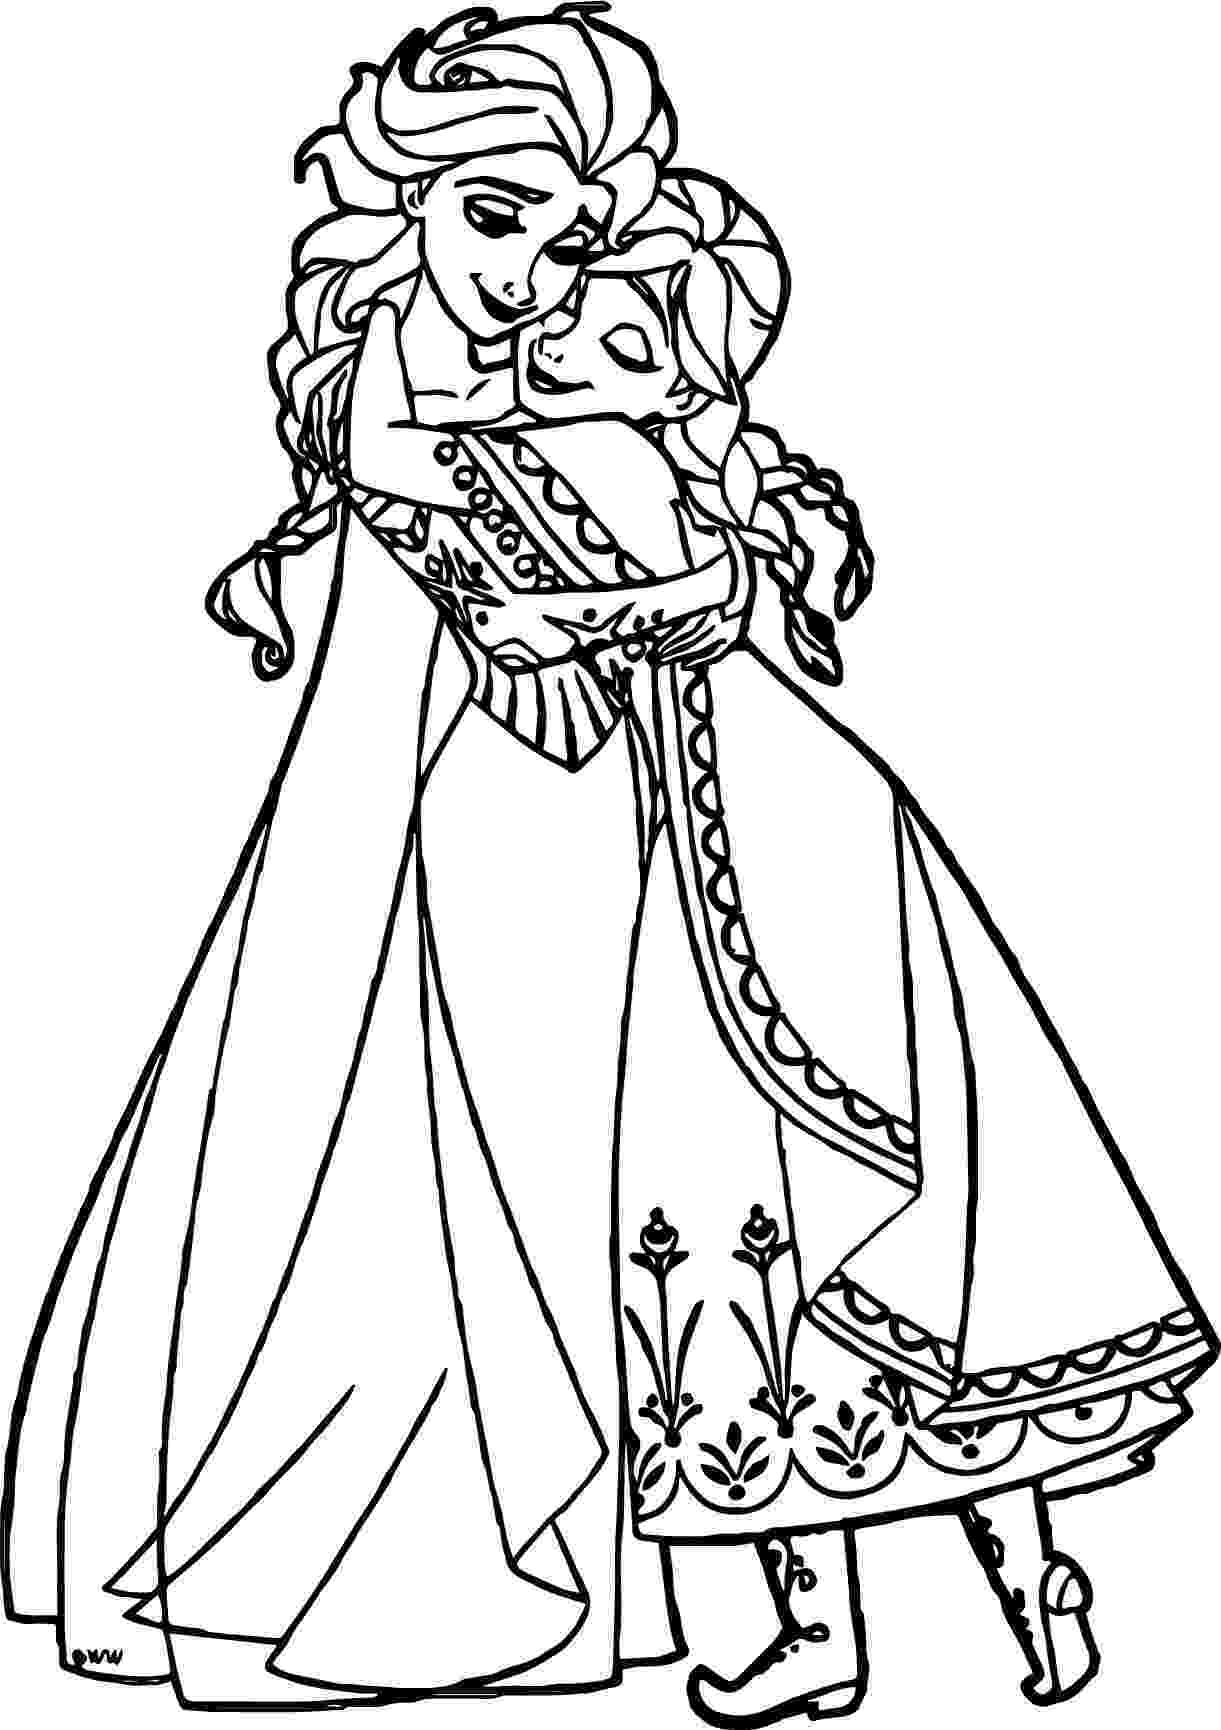 anna and elsa coloring pages anna elsa hugging coloring page wecoloringpagecom elsa coloring pages and anna 